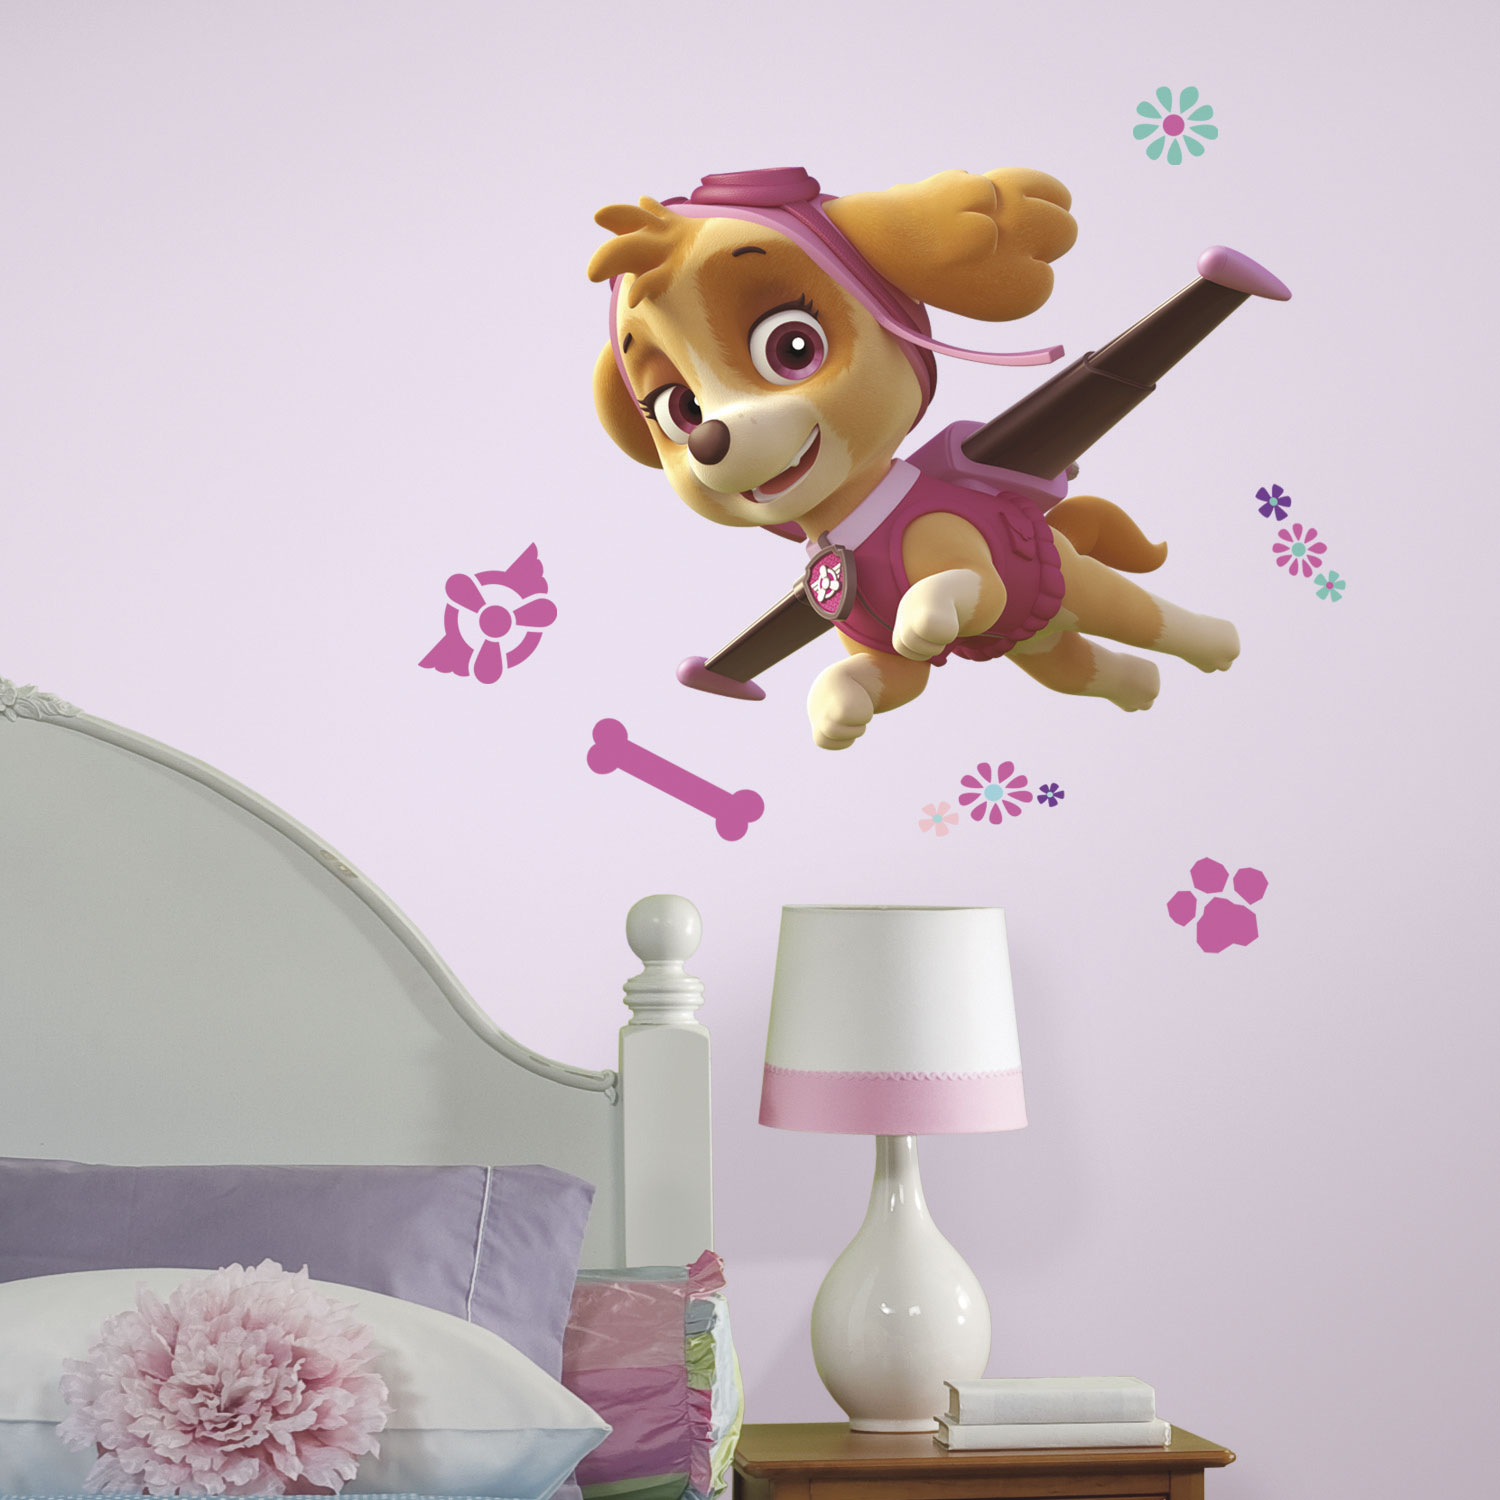 RoomMates PAW Patrol Skye Giant Wall Decal - Pink